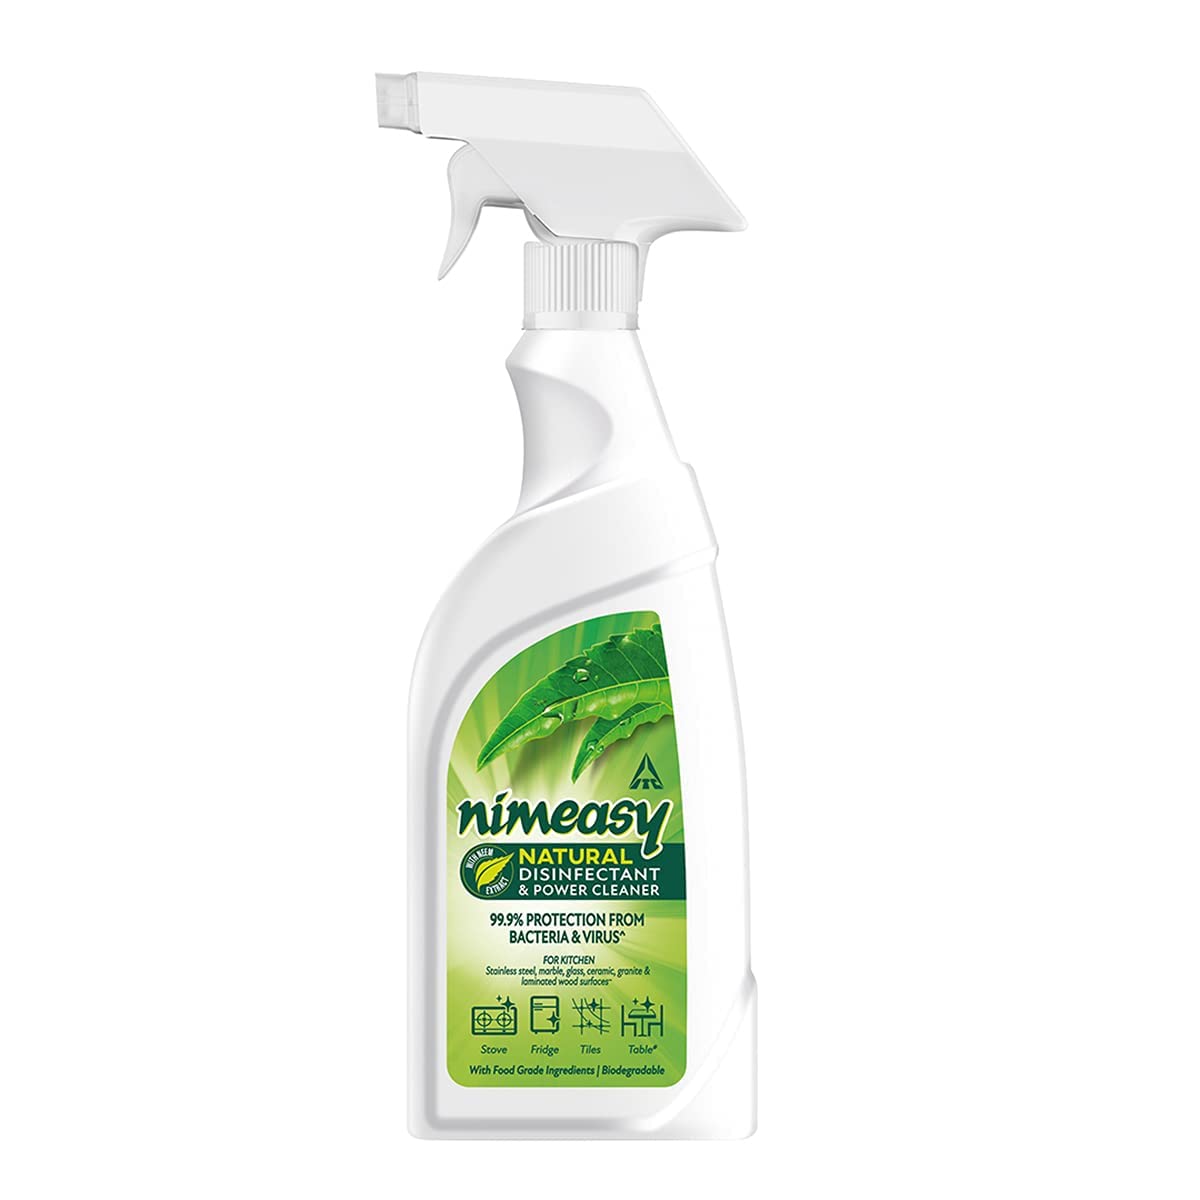 nimeasy natural disinfectant and power r cleaner spray